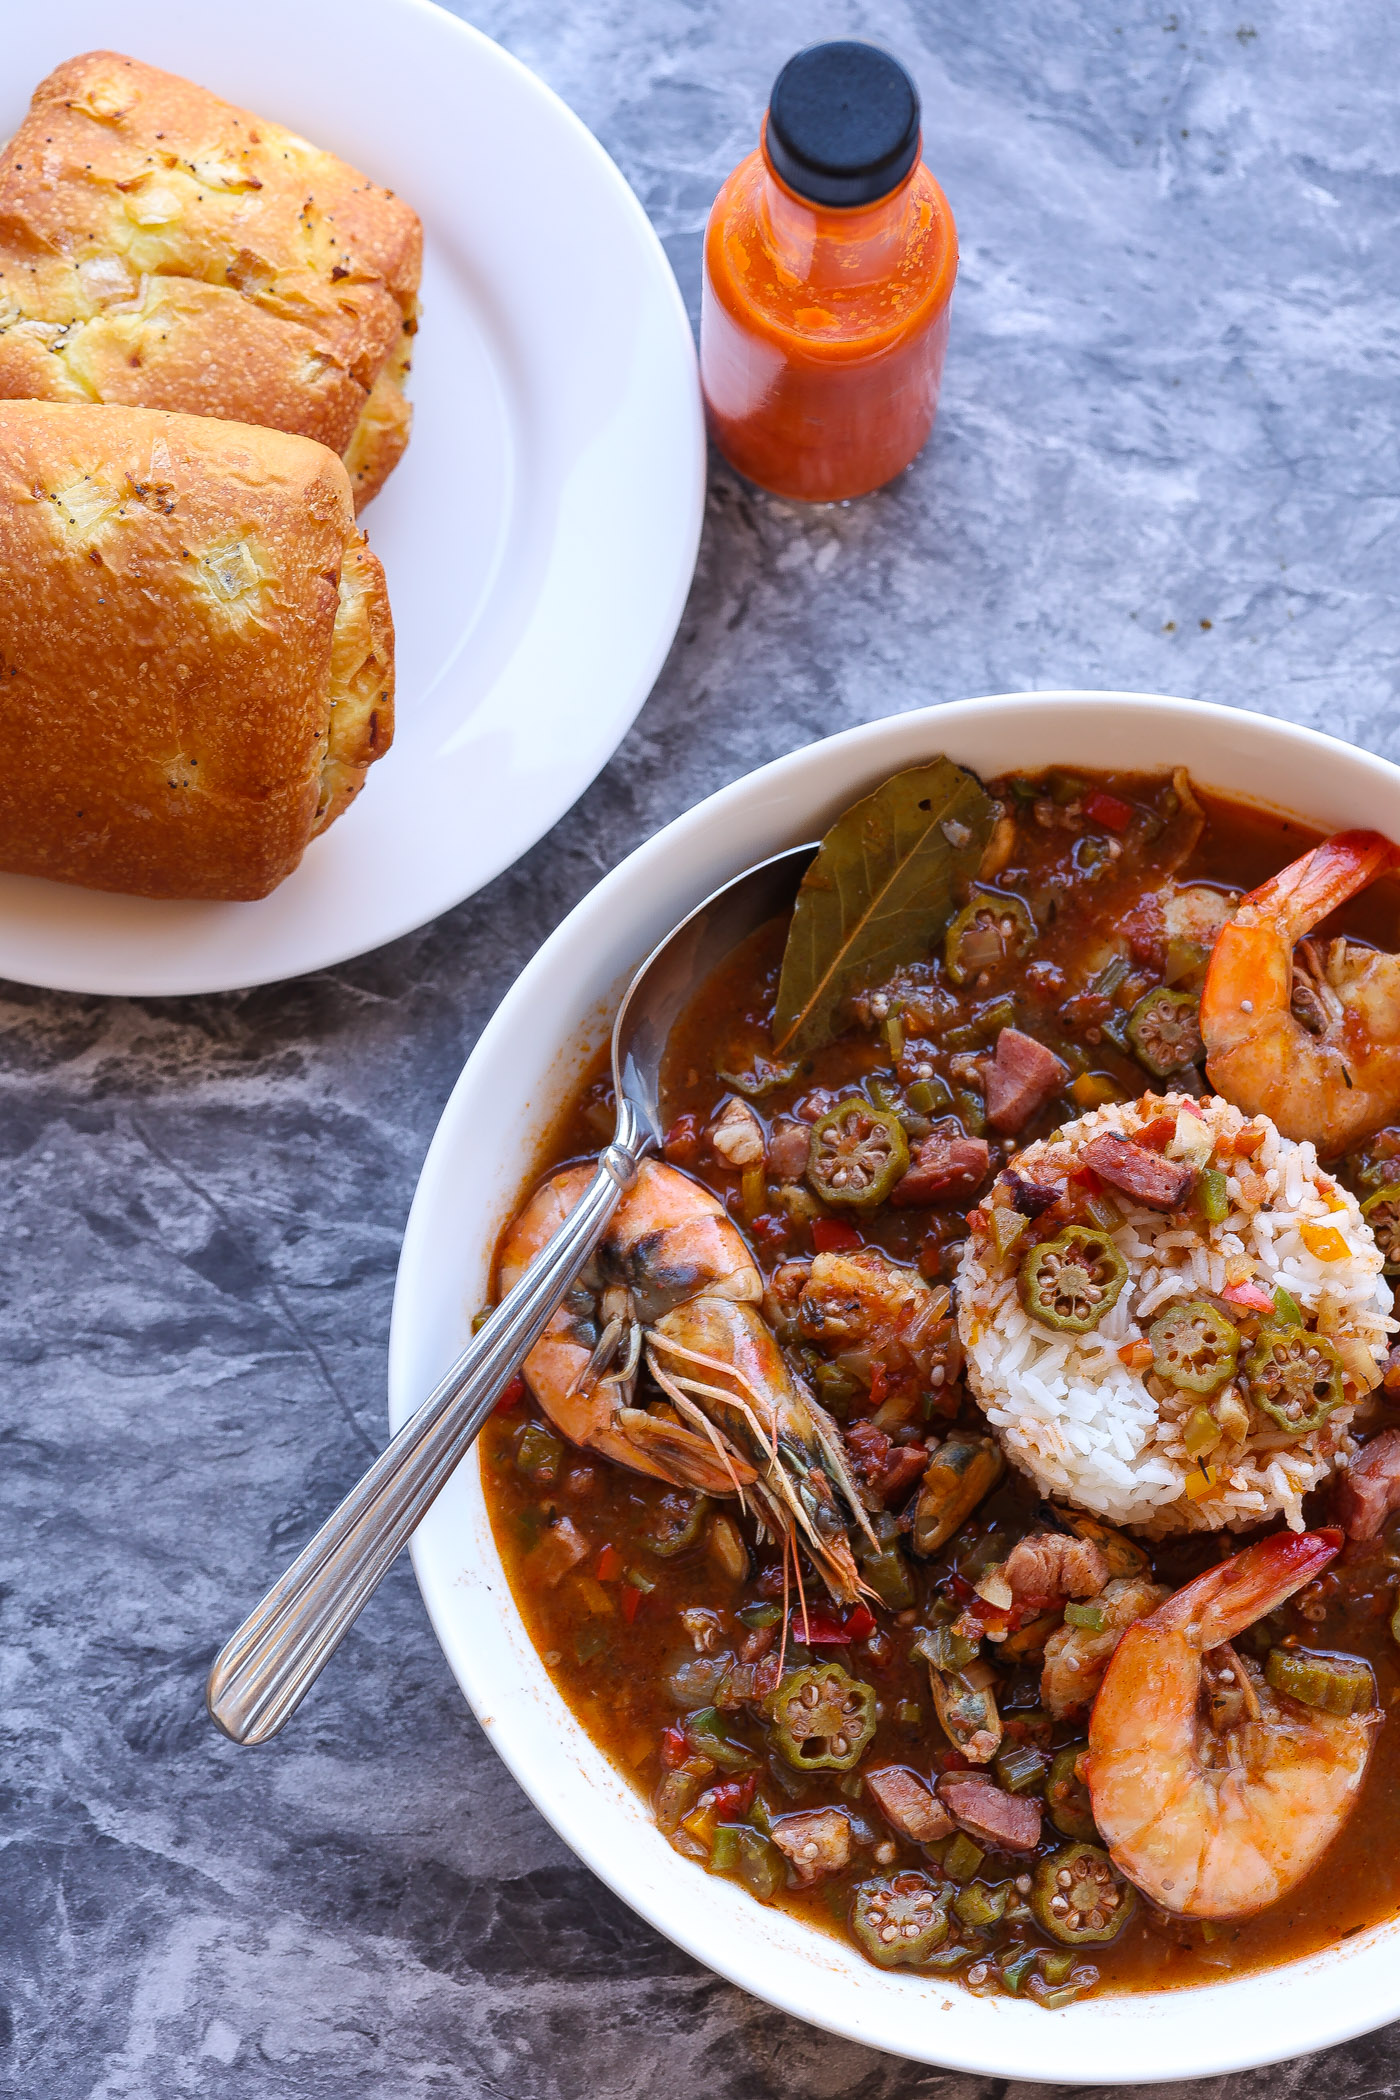 Okra gumbo with shrimp in a white bowl with bread rolls